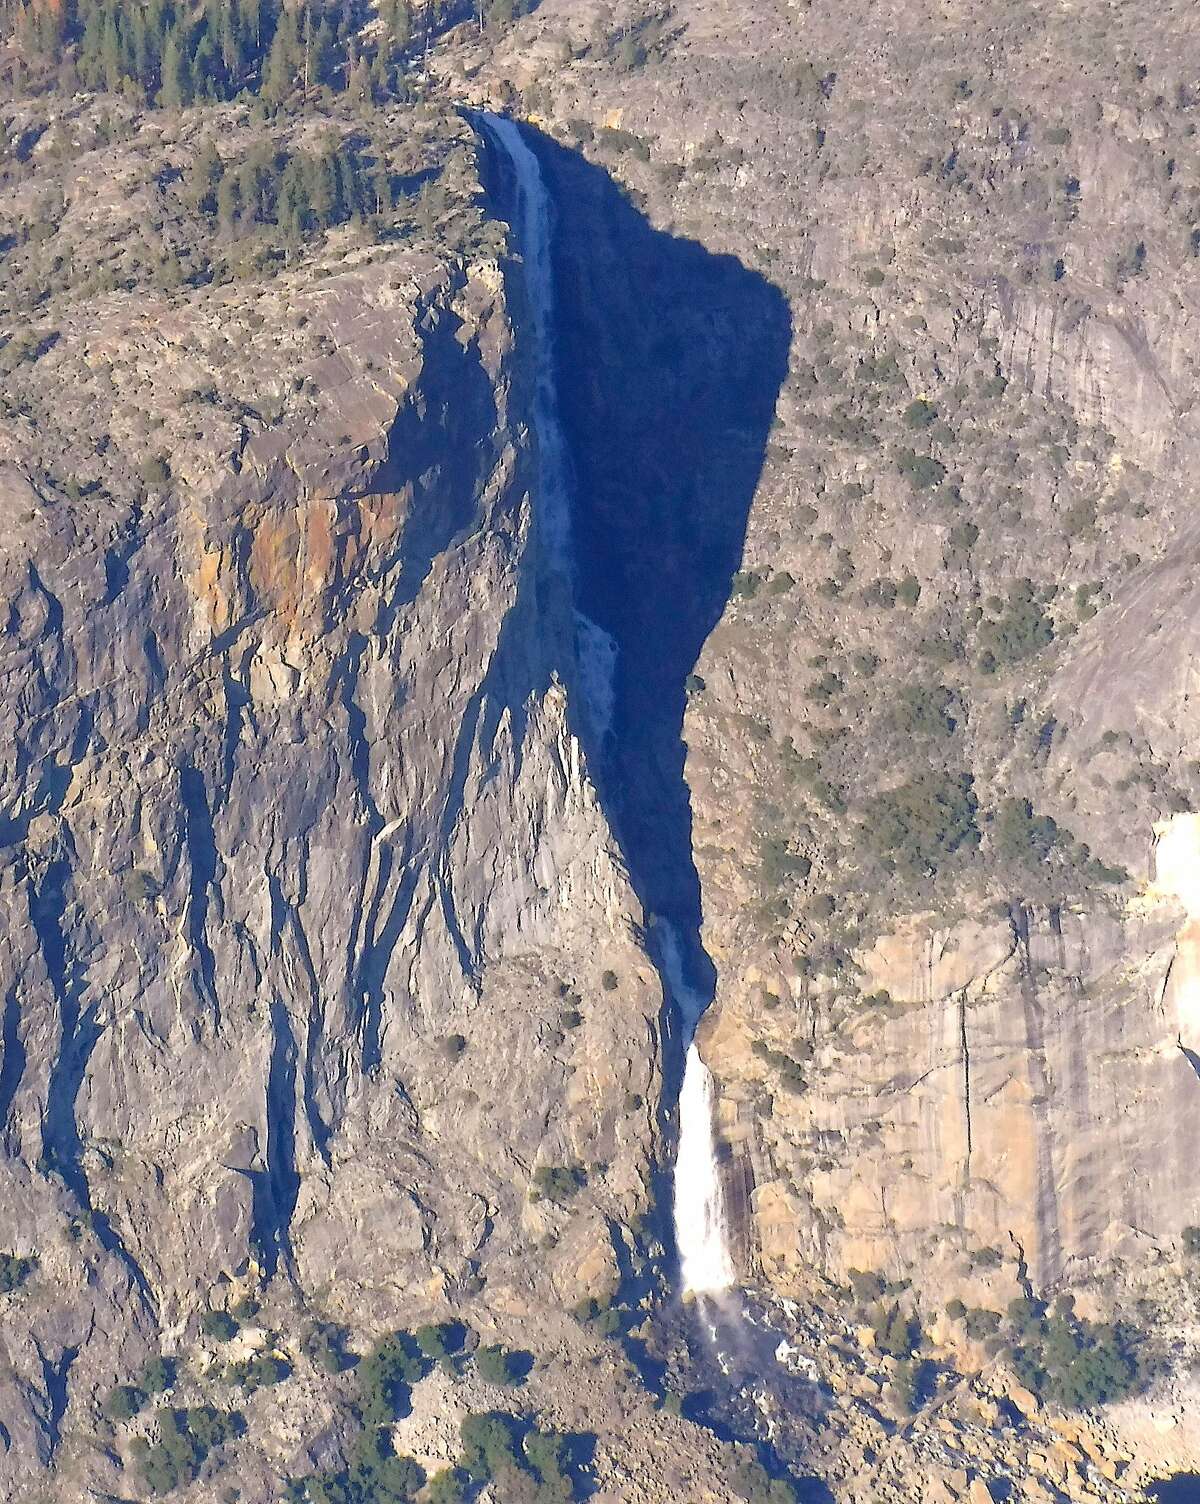 An aerial view of 1,400-foot Wapama Falls as it pours into Hetch Hetchy Reservoir in Yosemite National Park